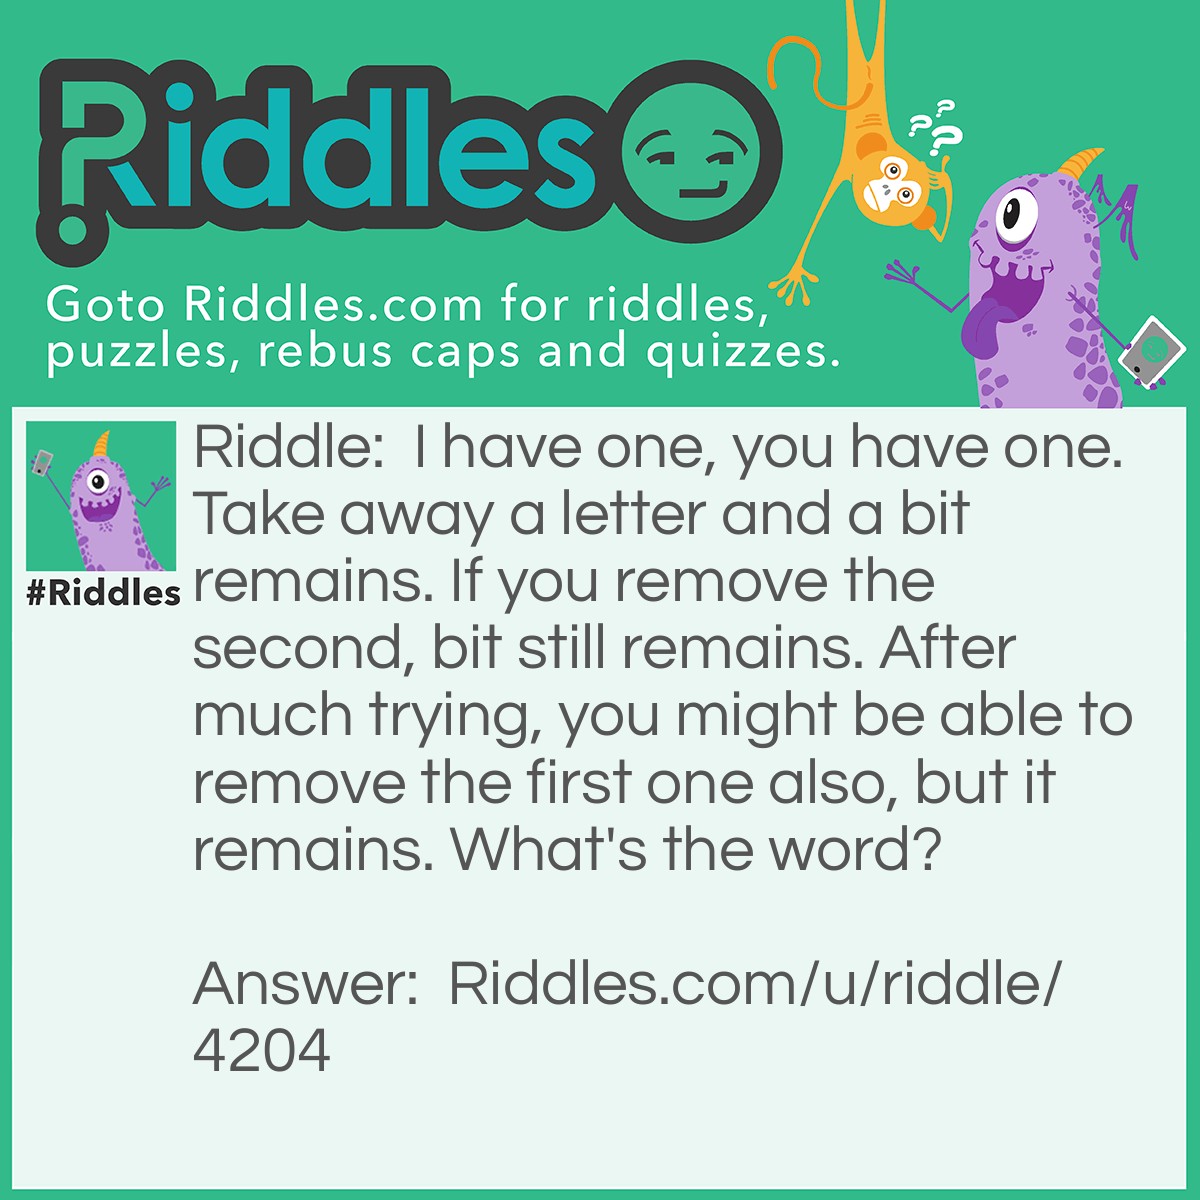 Riddle: I have one, you have one. Take away a letter and a bit remains. If you remove the second, bit still remains. After much trying, you might be able to remove the first one also, but it remains. What's the word? Answer: Habit! Remove the 'H', and it's 'a bit'. Remove the 'A', and it's 'bit'. Remove 'B', and it's 'it'.